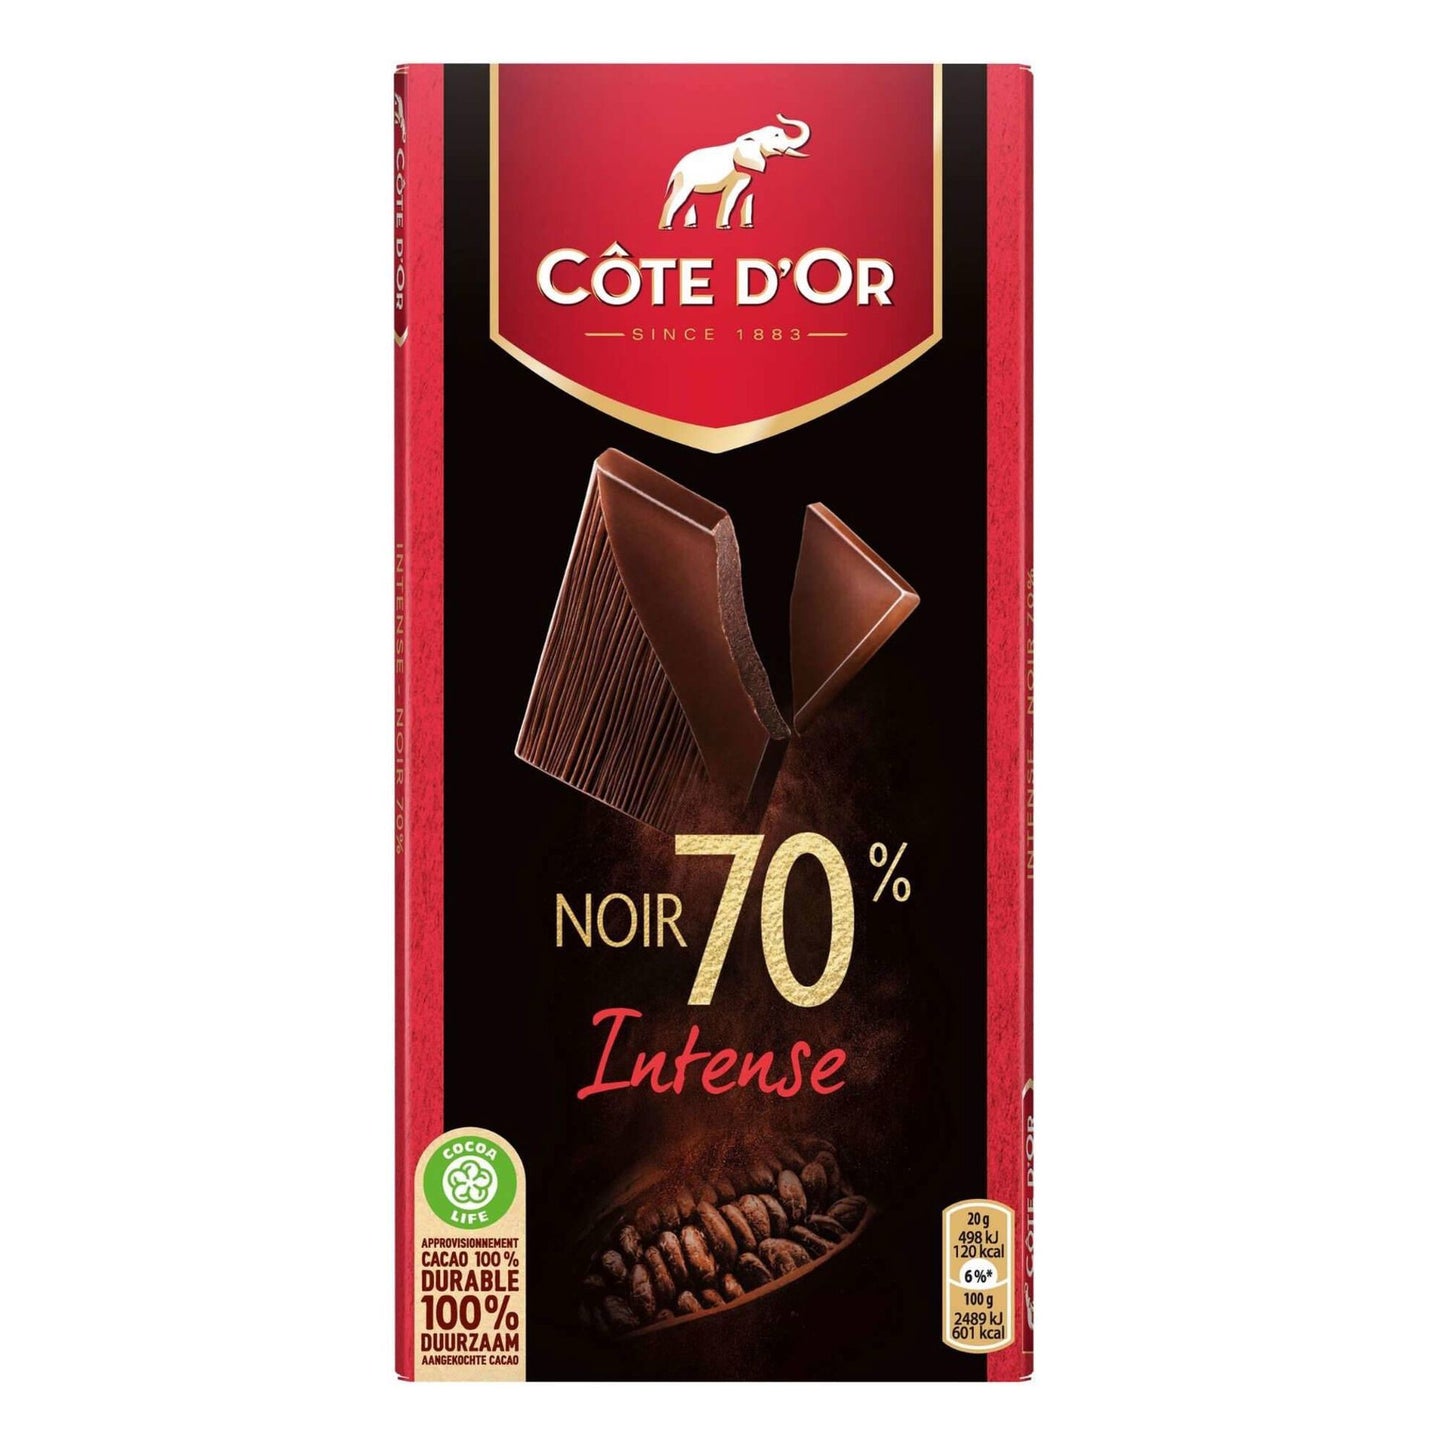 Dark Chocolate Tablet 70% Cocoa Côte D'Or 100g